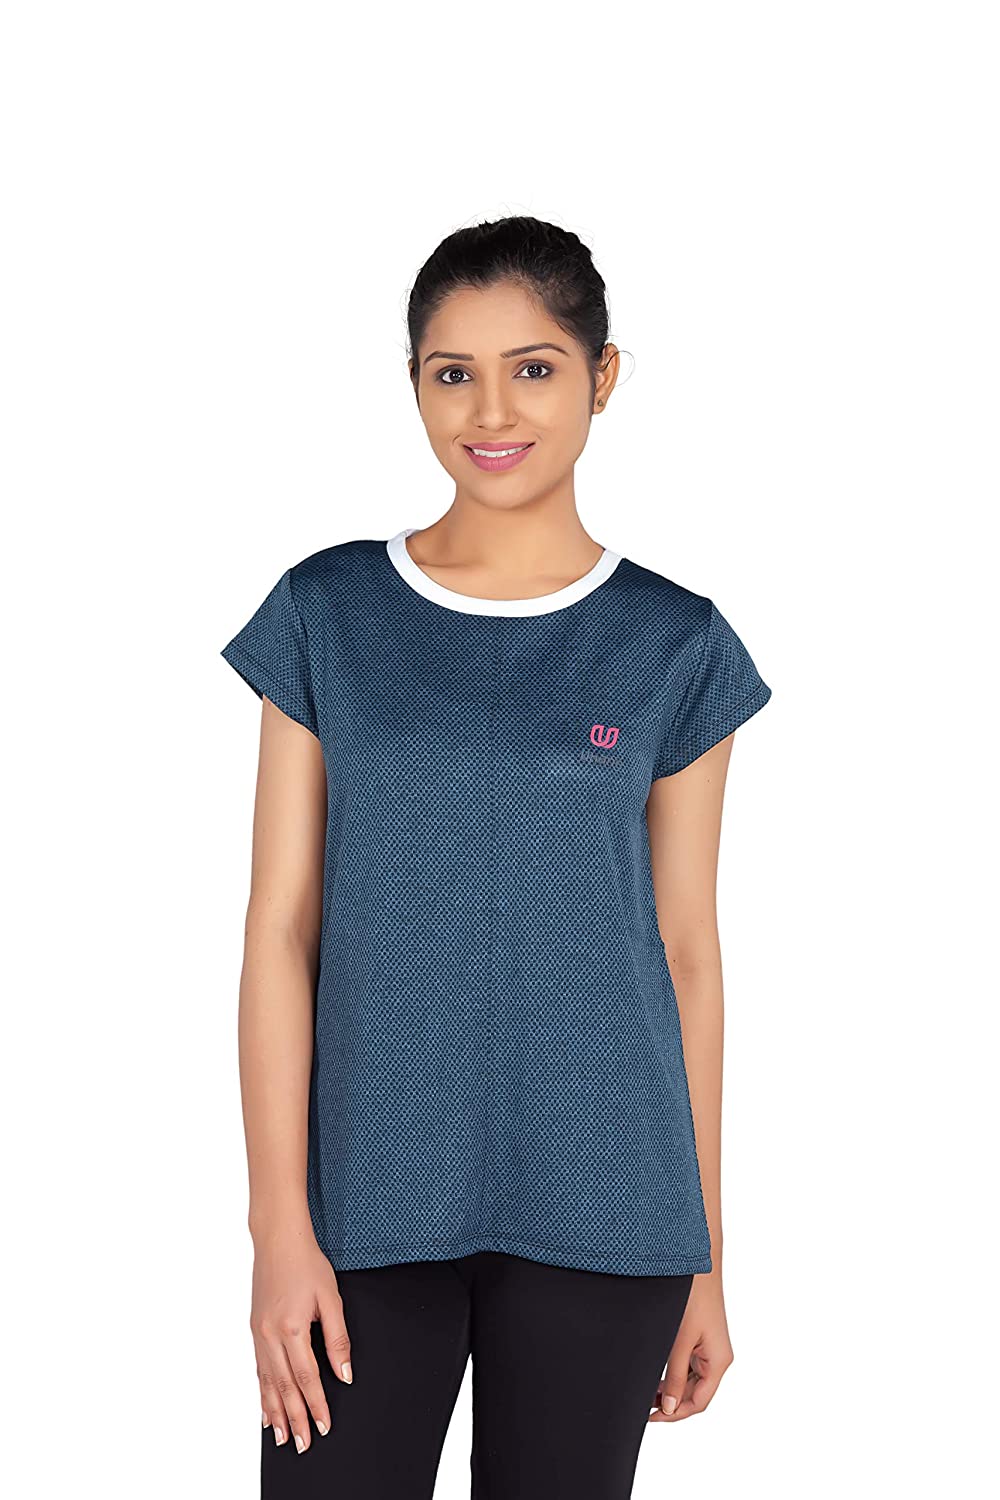 Uhane Women’s Gym Dri-Fit Work-Out Round Neck T-Shirt (Deep Blue/White) Short Sleeves